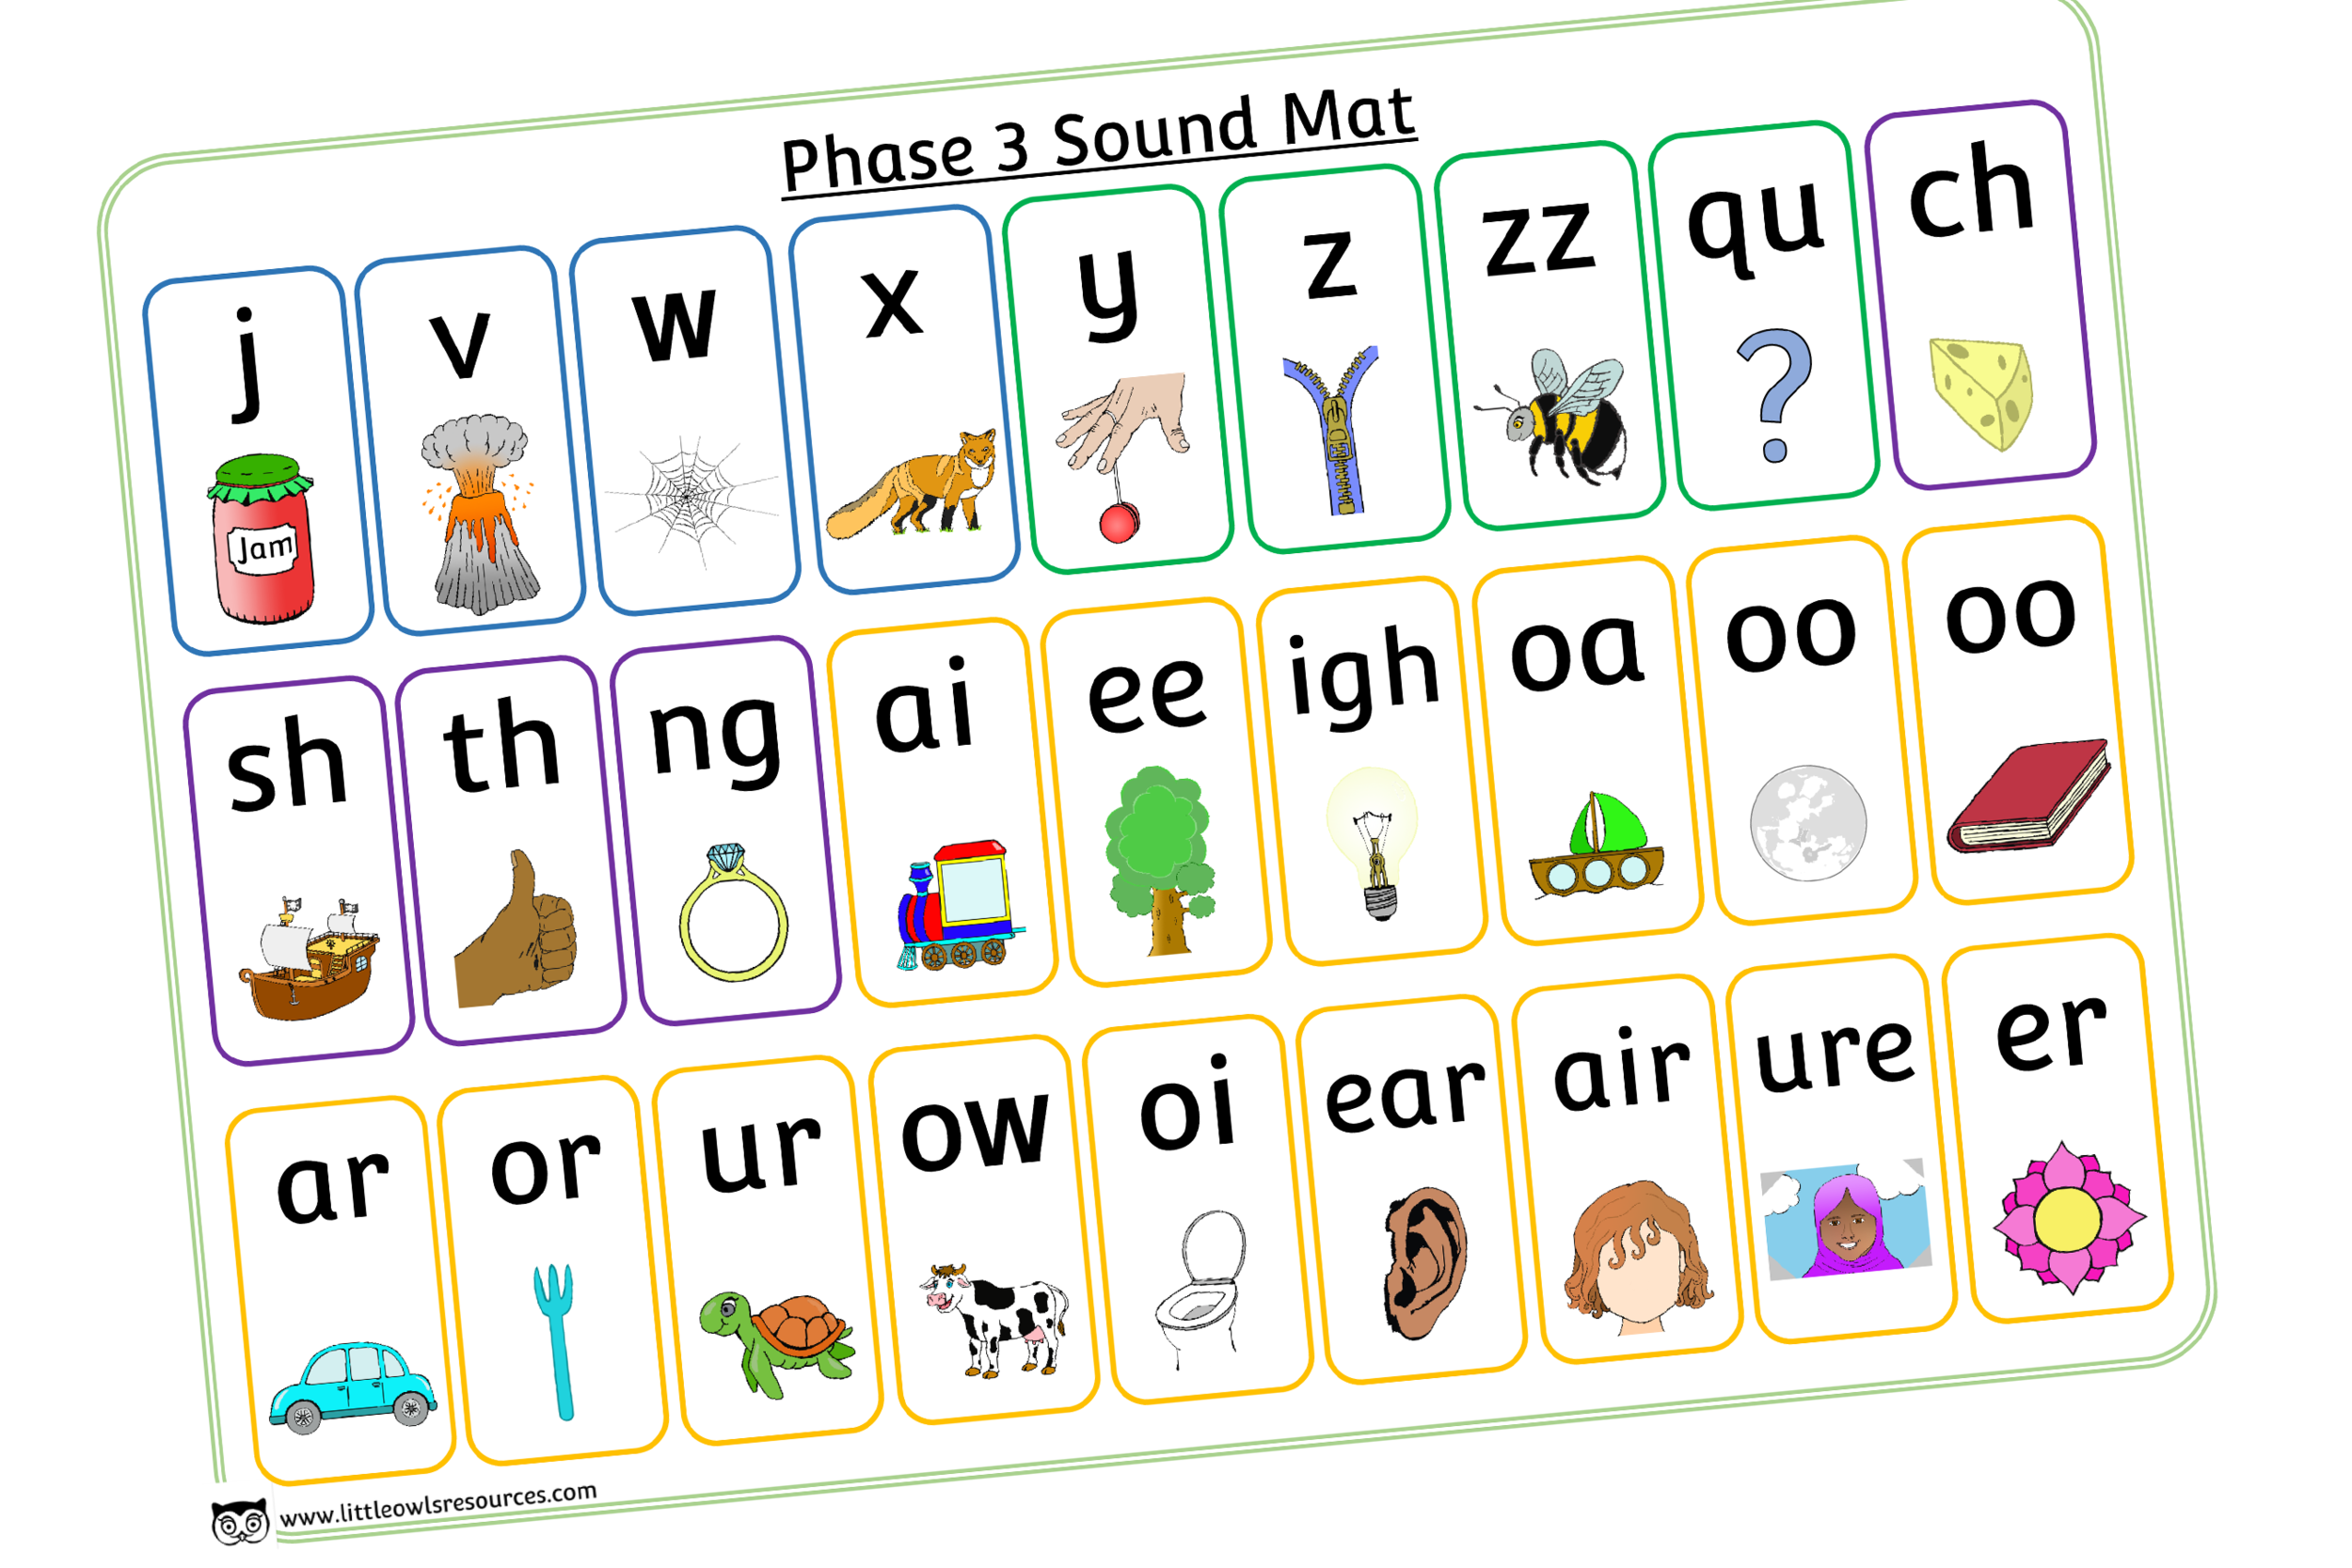 FREE Phase 3 Sounds Mat printable Early Years/EY (EYFS) resource/download — Little Owls